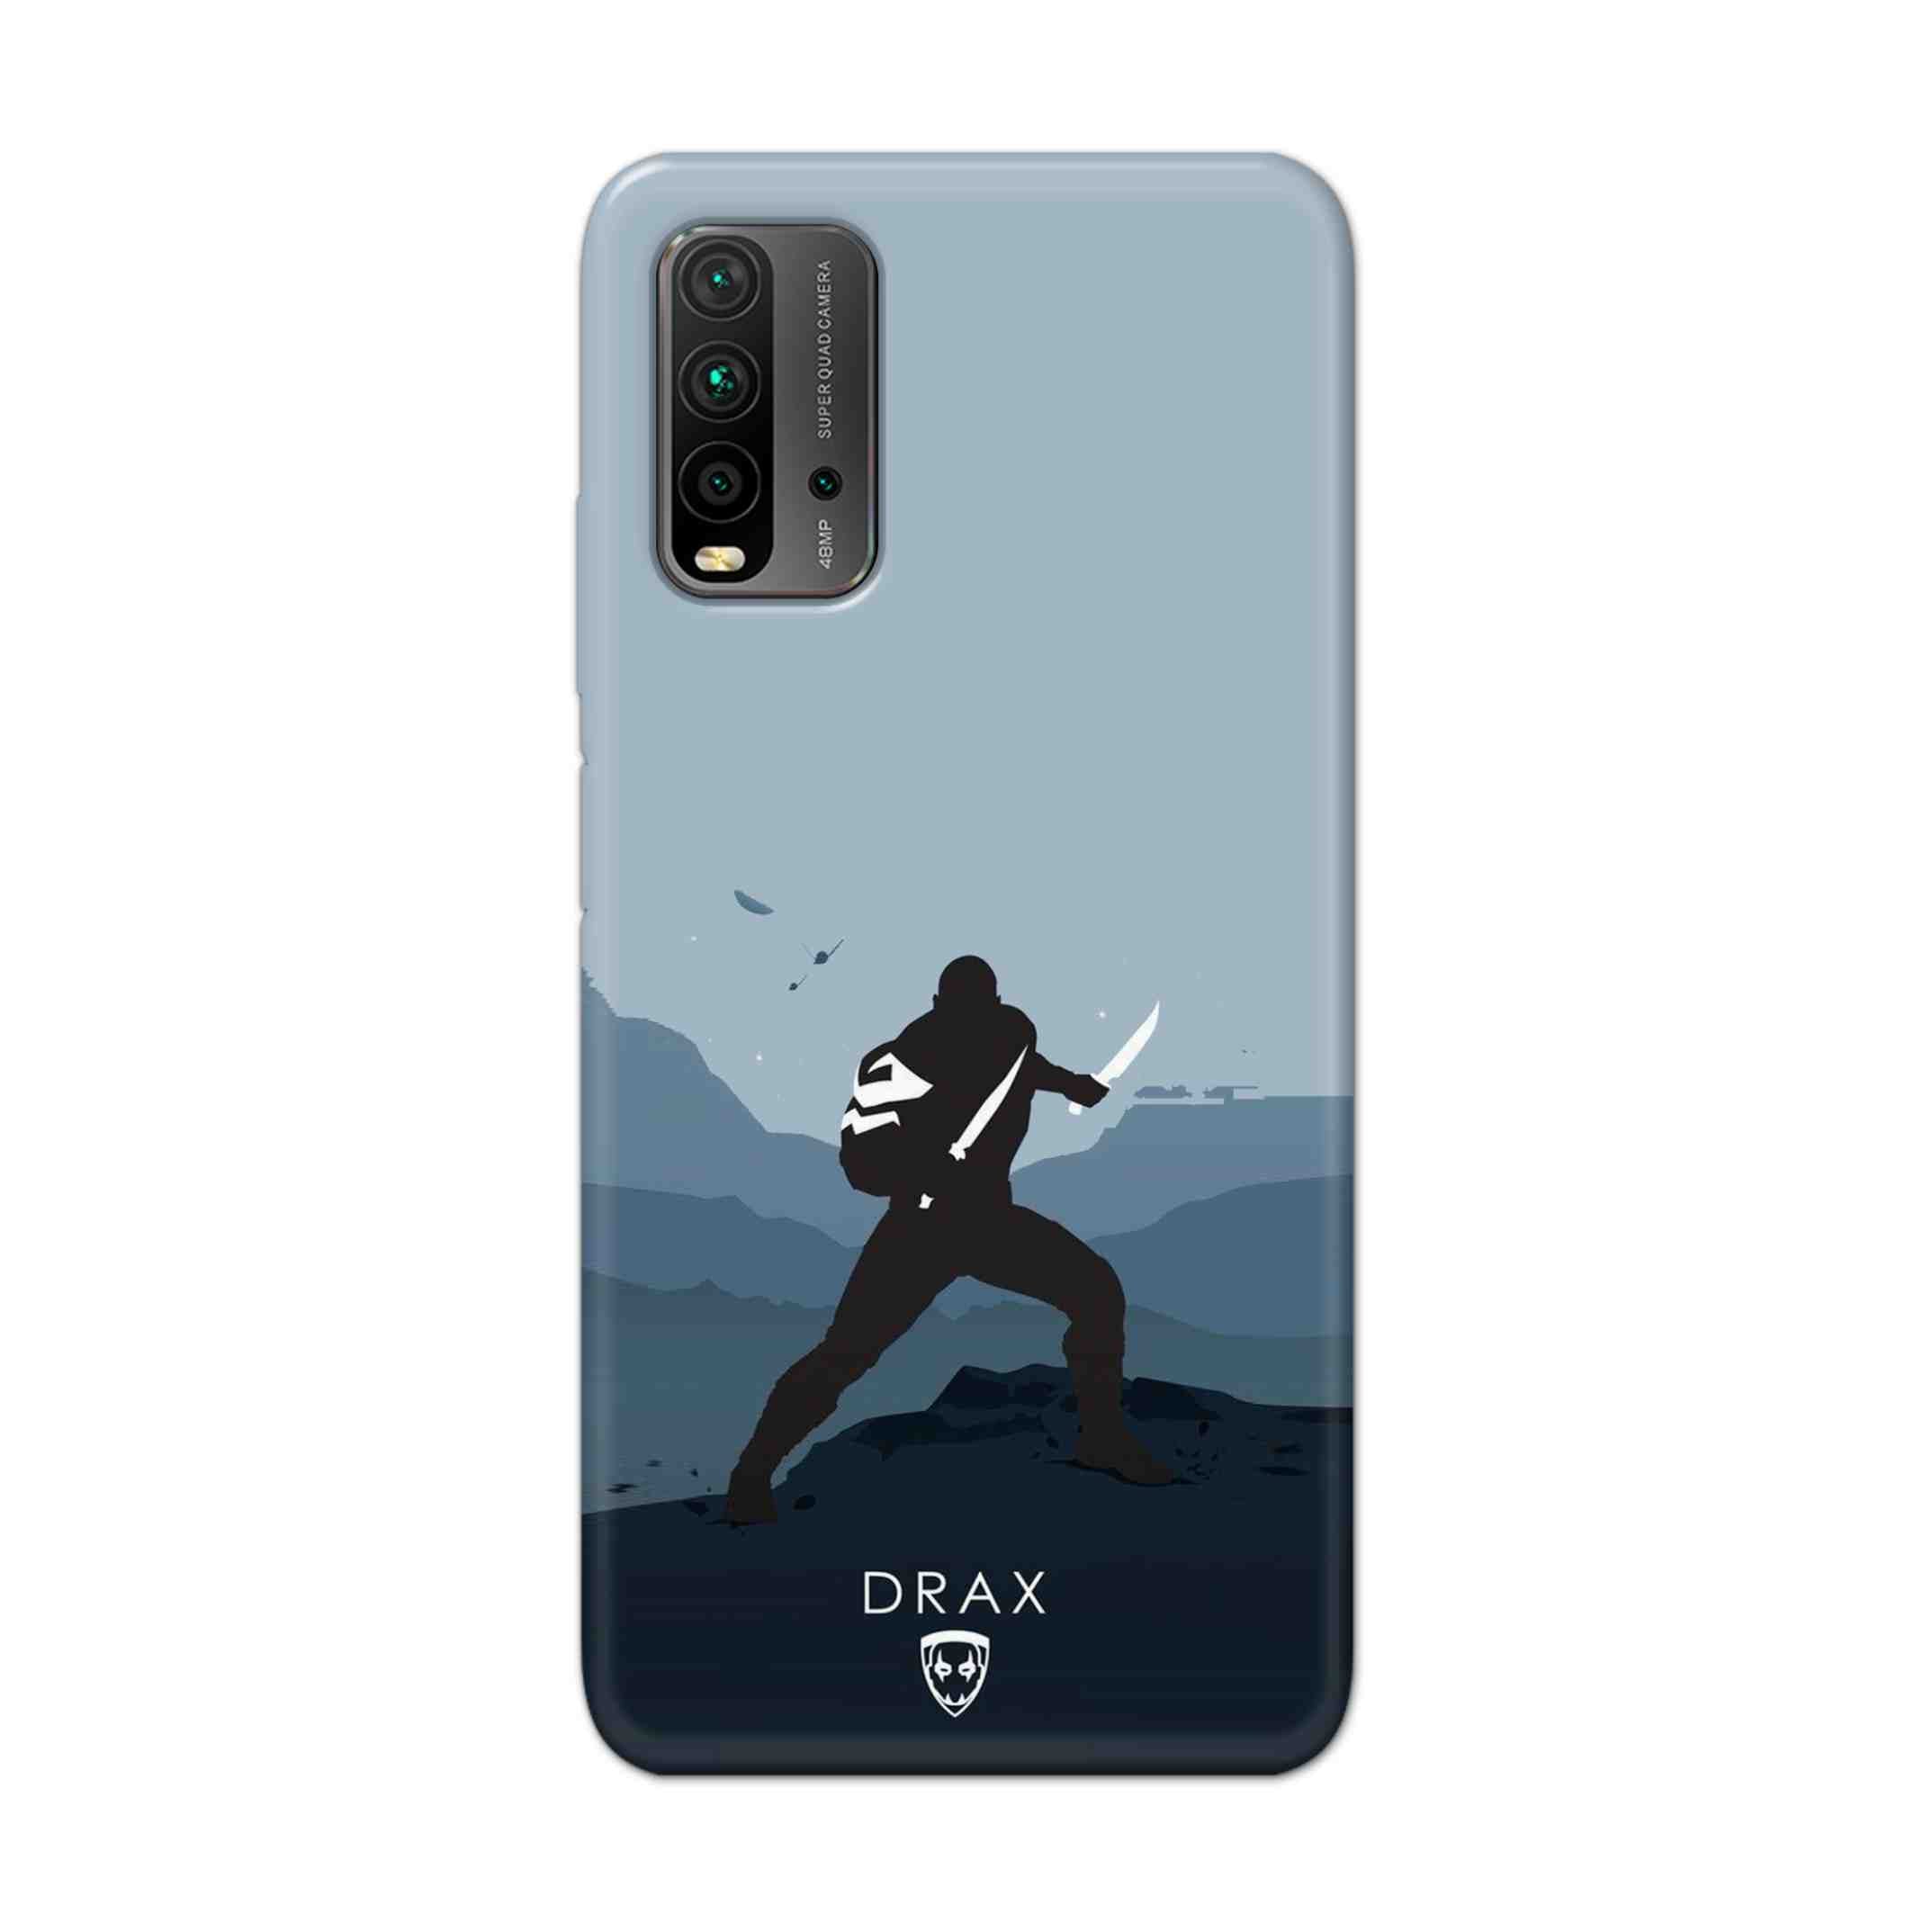 Buy Drax Hard Back Mobile Phone Case Cover For Redmi 9 Power Online